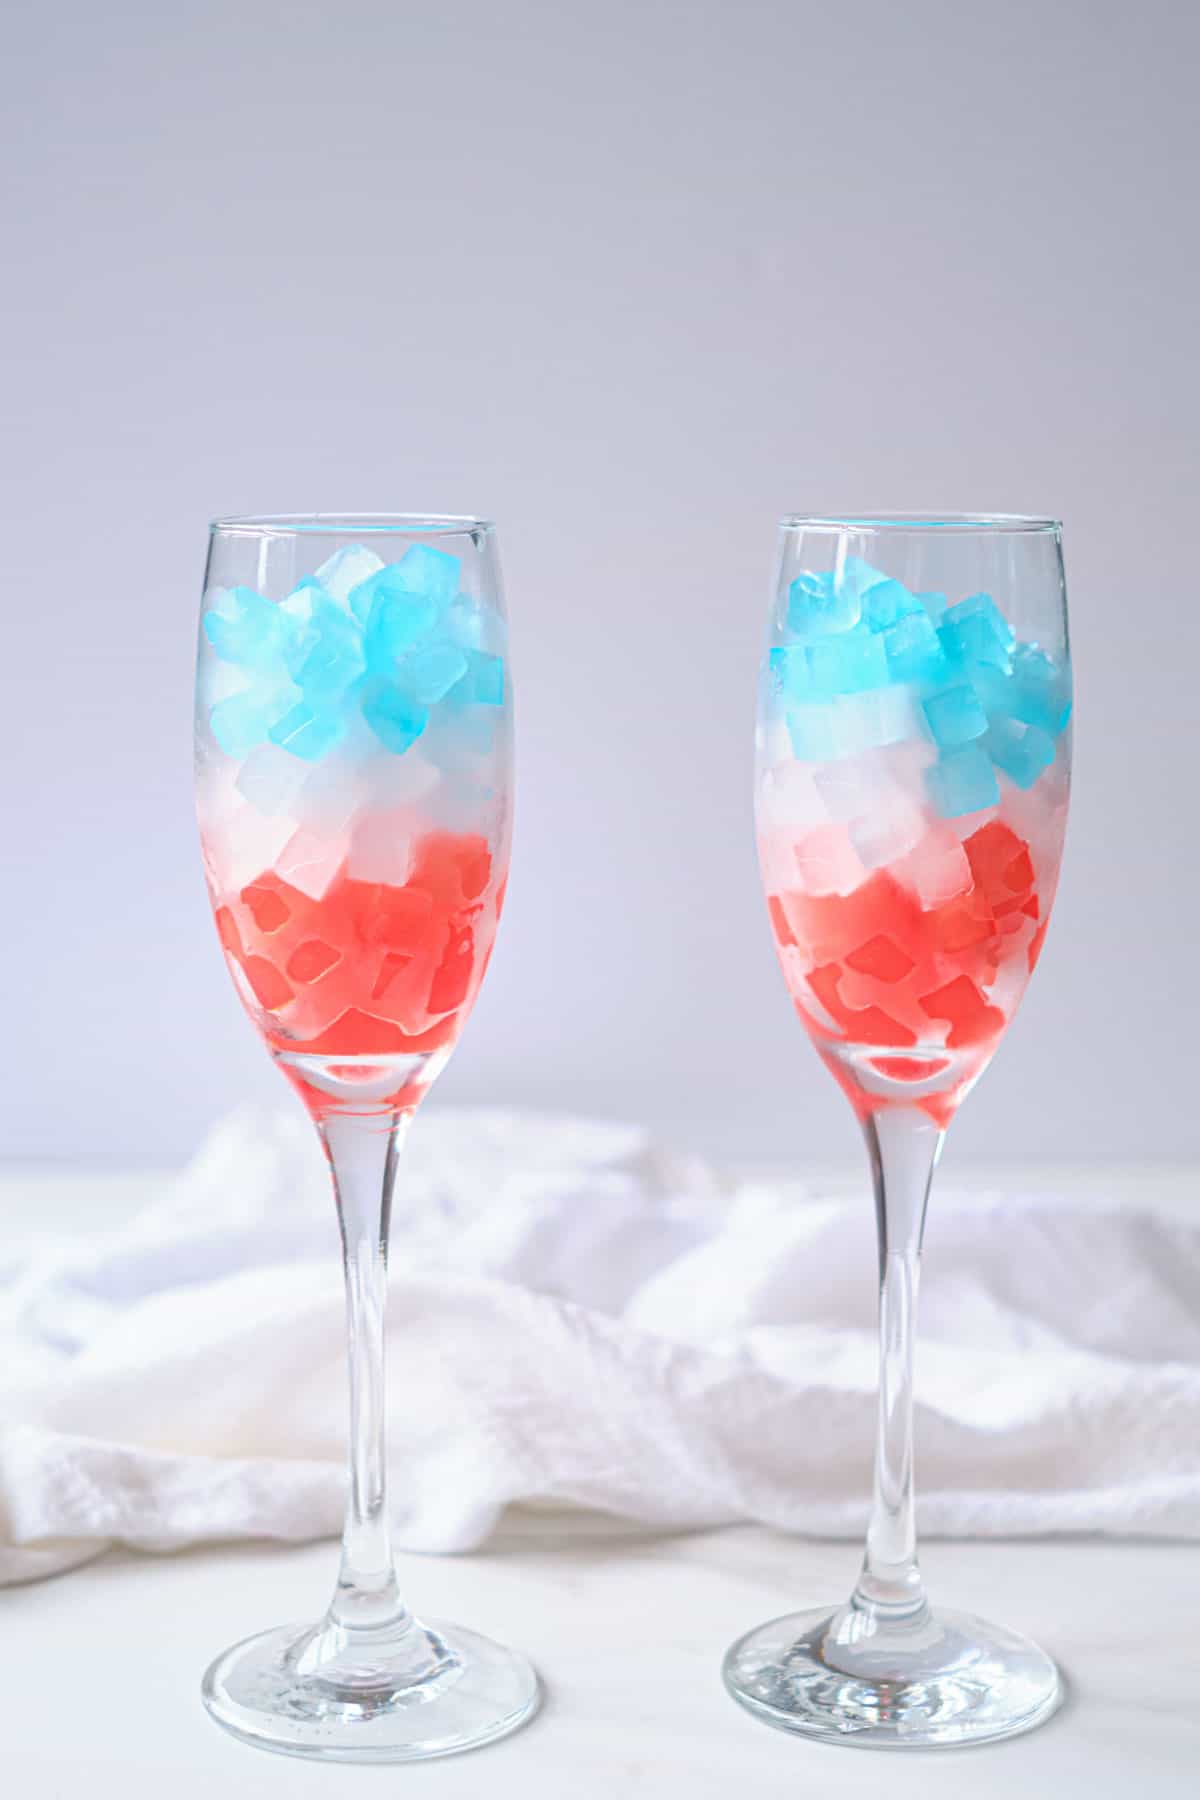 2 glasses filled with layers of patriotic ice cubes